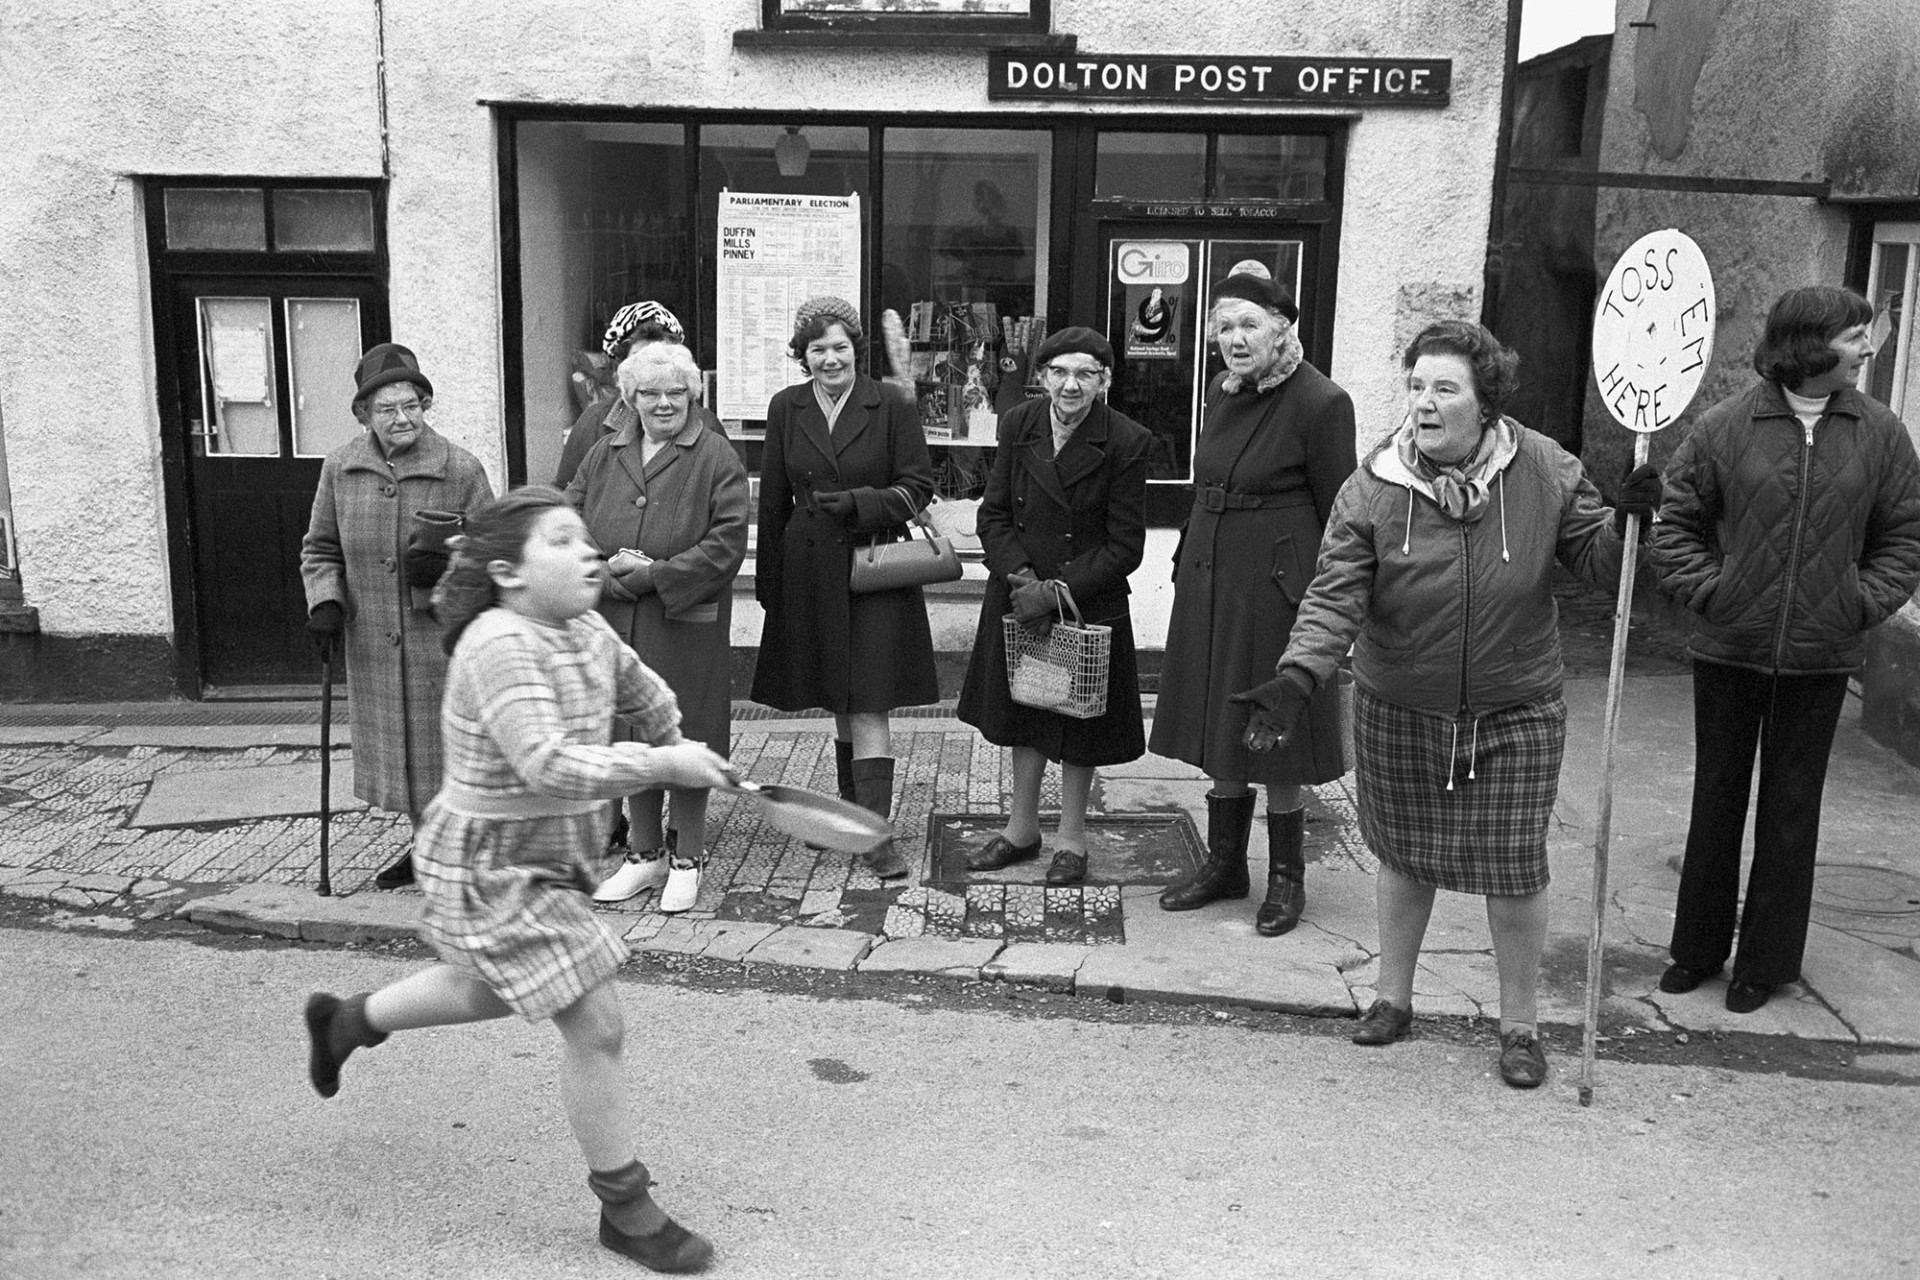 Pancake race, runner and spectators outside Post Office.
[Spectators watching Diane Hiscock running in the pancake race outside Dolton Post Office. A woman with a 'Toss Em Here' sign is also outside the Post Office.]